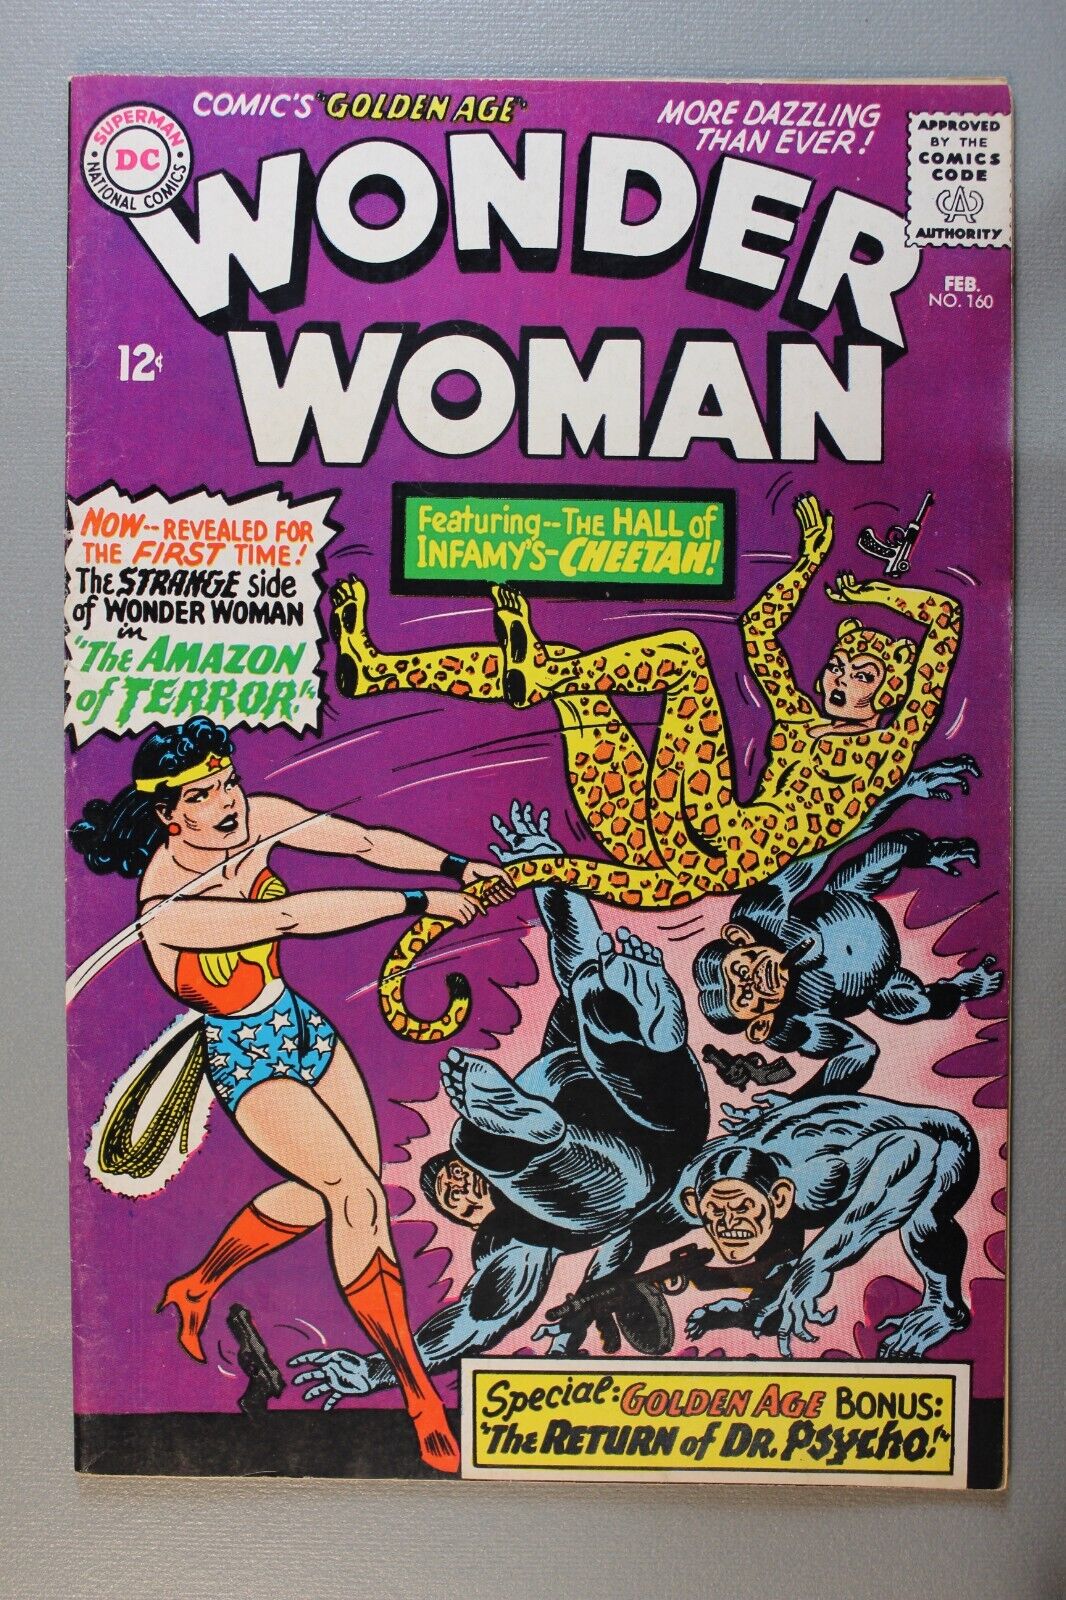 WONDER WOMAN #160 Featuring--The HALL of INFAMY'S-CHEETAH EXCELLANT CONDITION